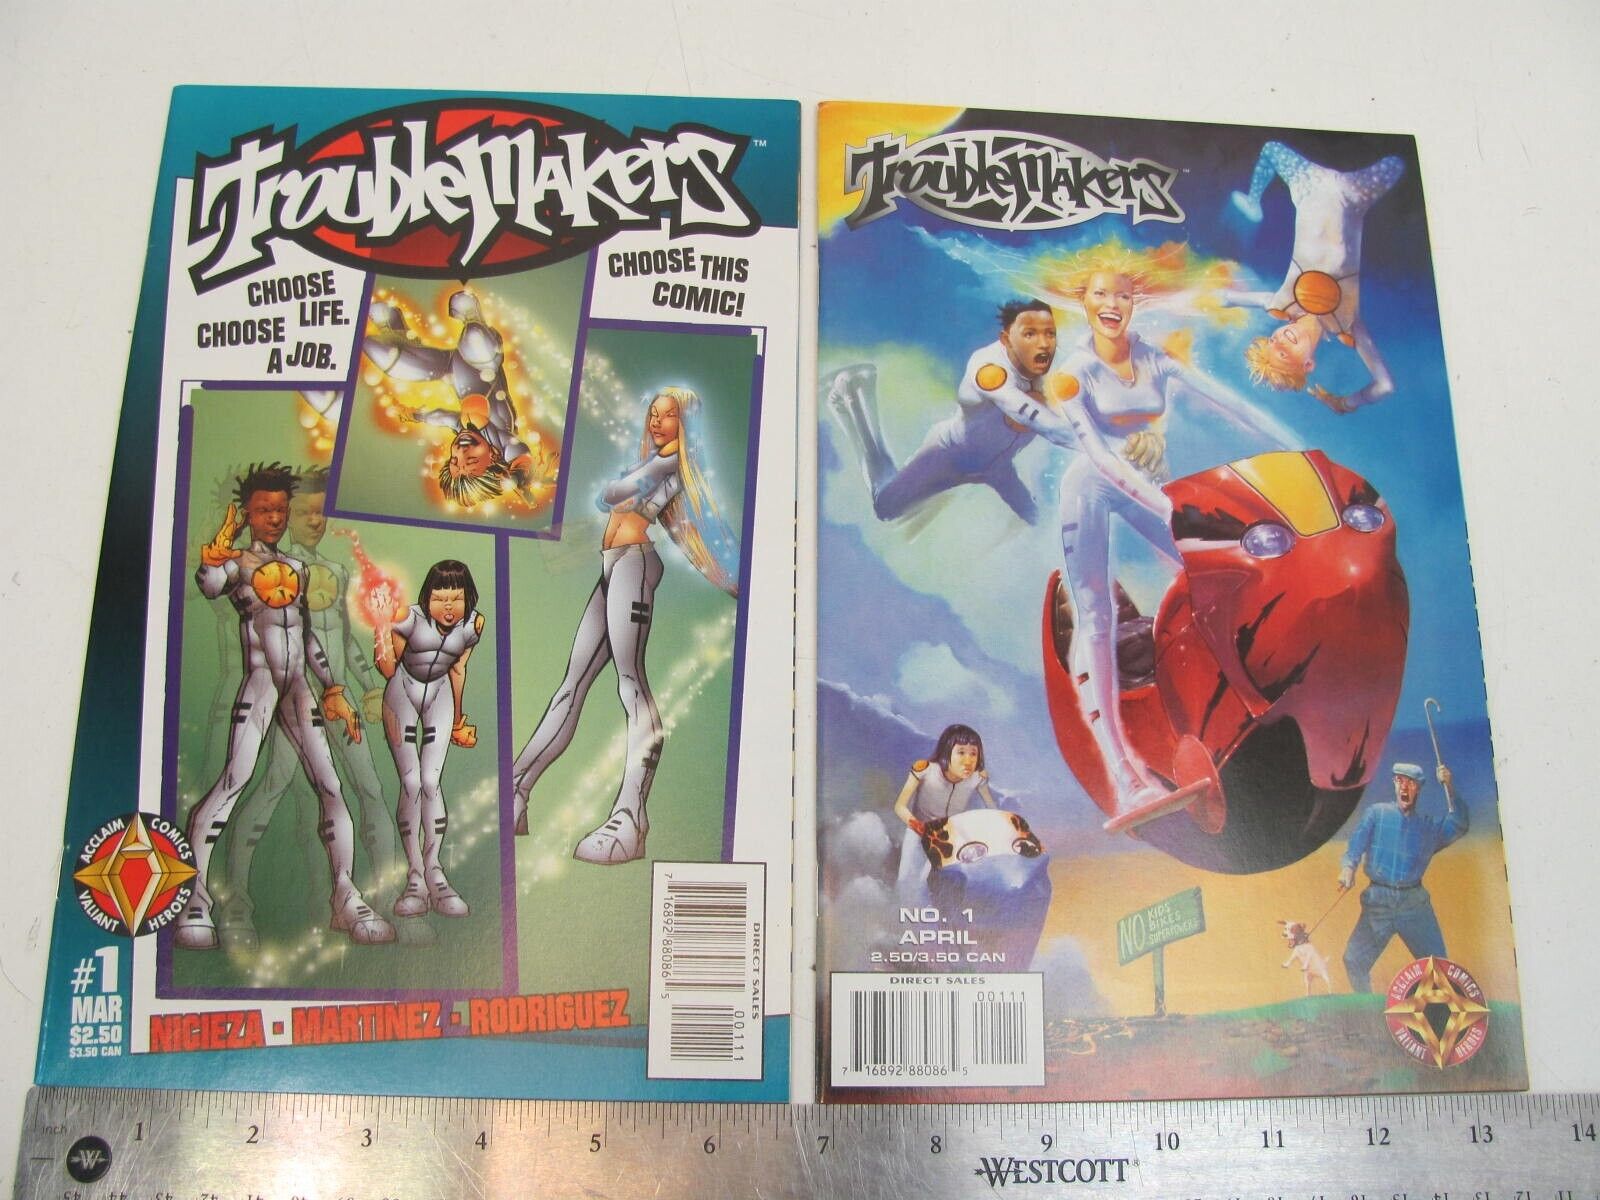 TROUBLEMAKERS #1  BOTH COVERS 2 COMICS  ACCLAIM  1997  NEW